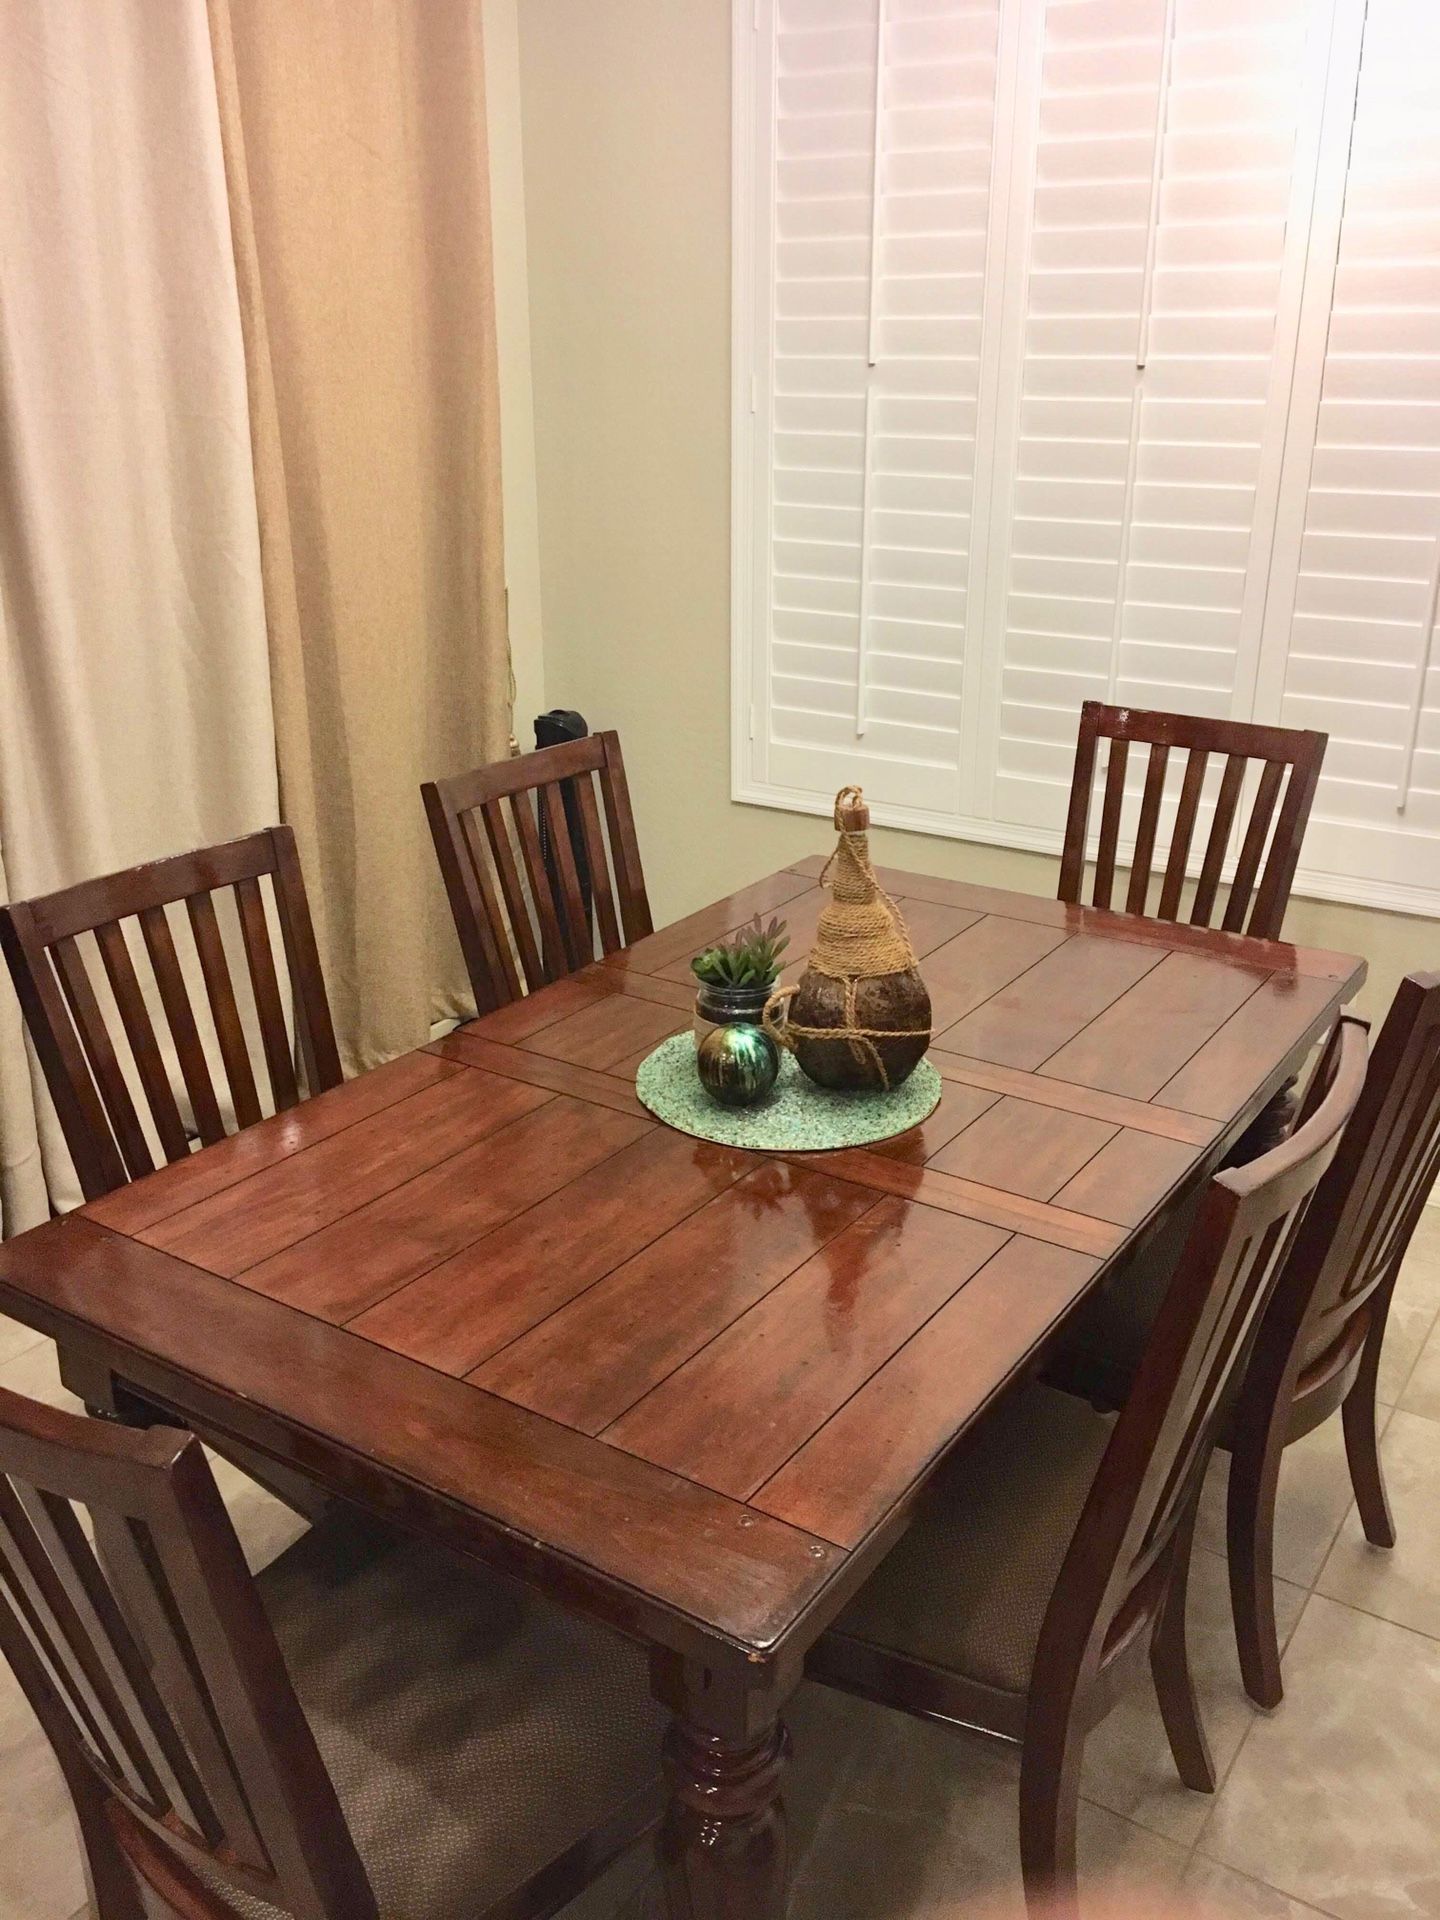 Wooden dining table set with 6 chairs